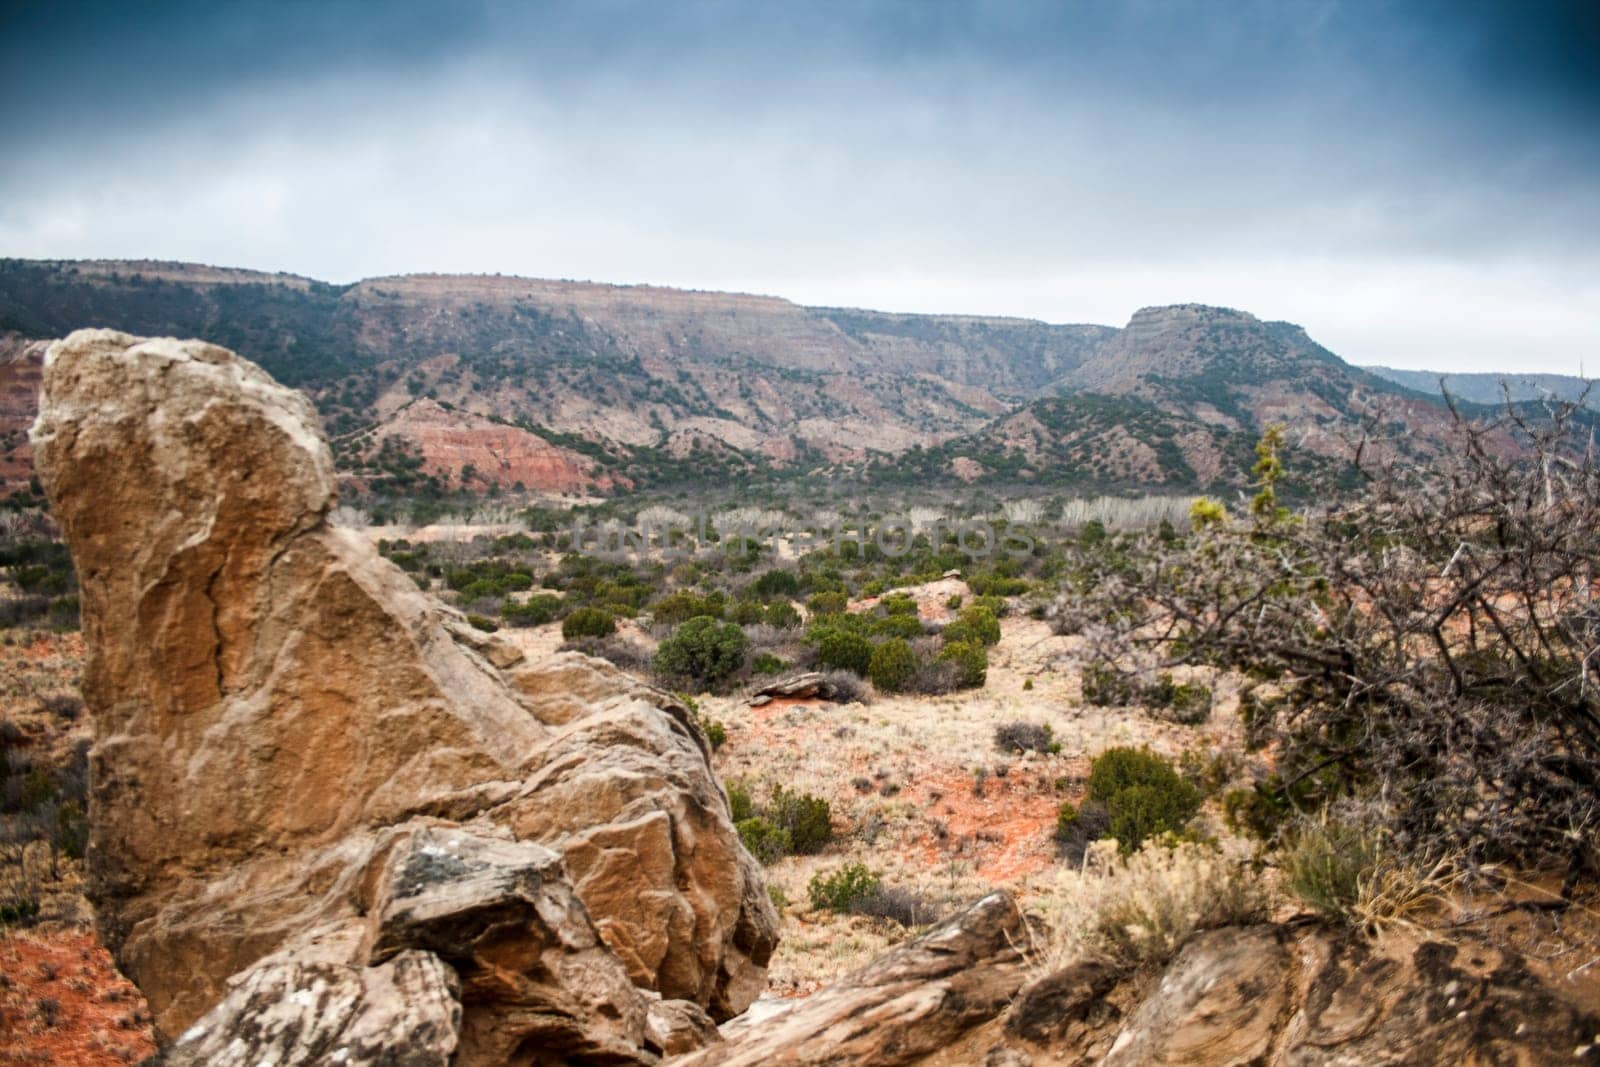 Cloudy Day at Palo Duro Canyon State Park, Texas by Txs635